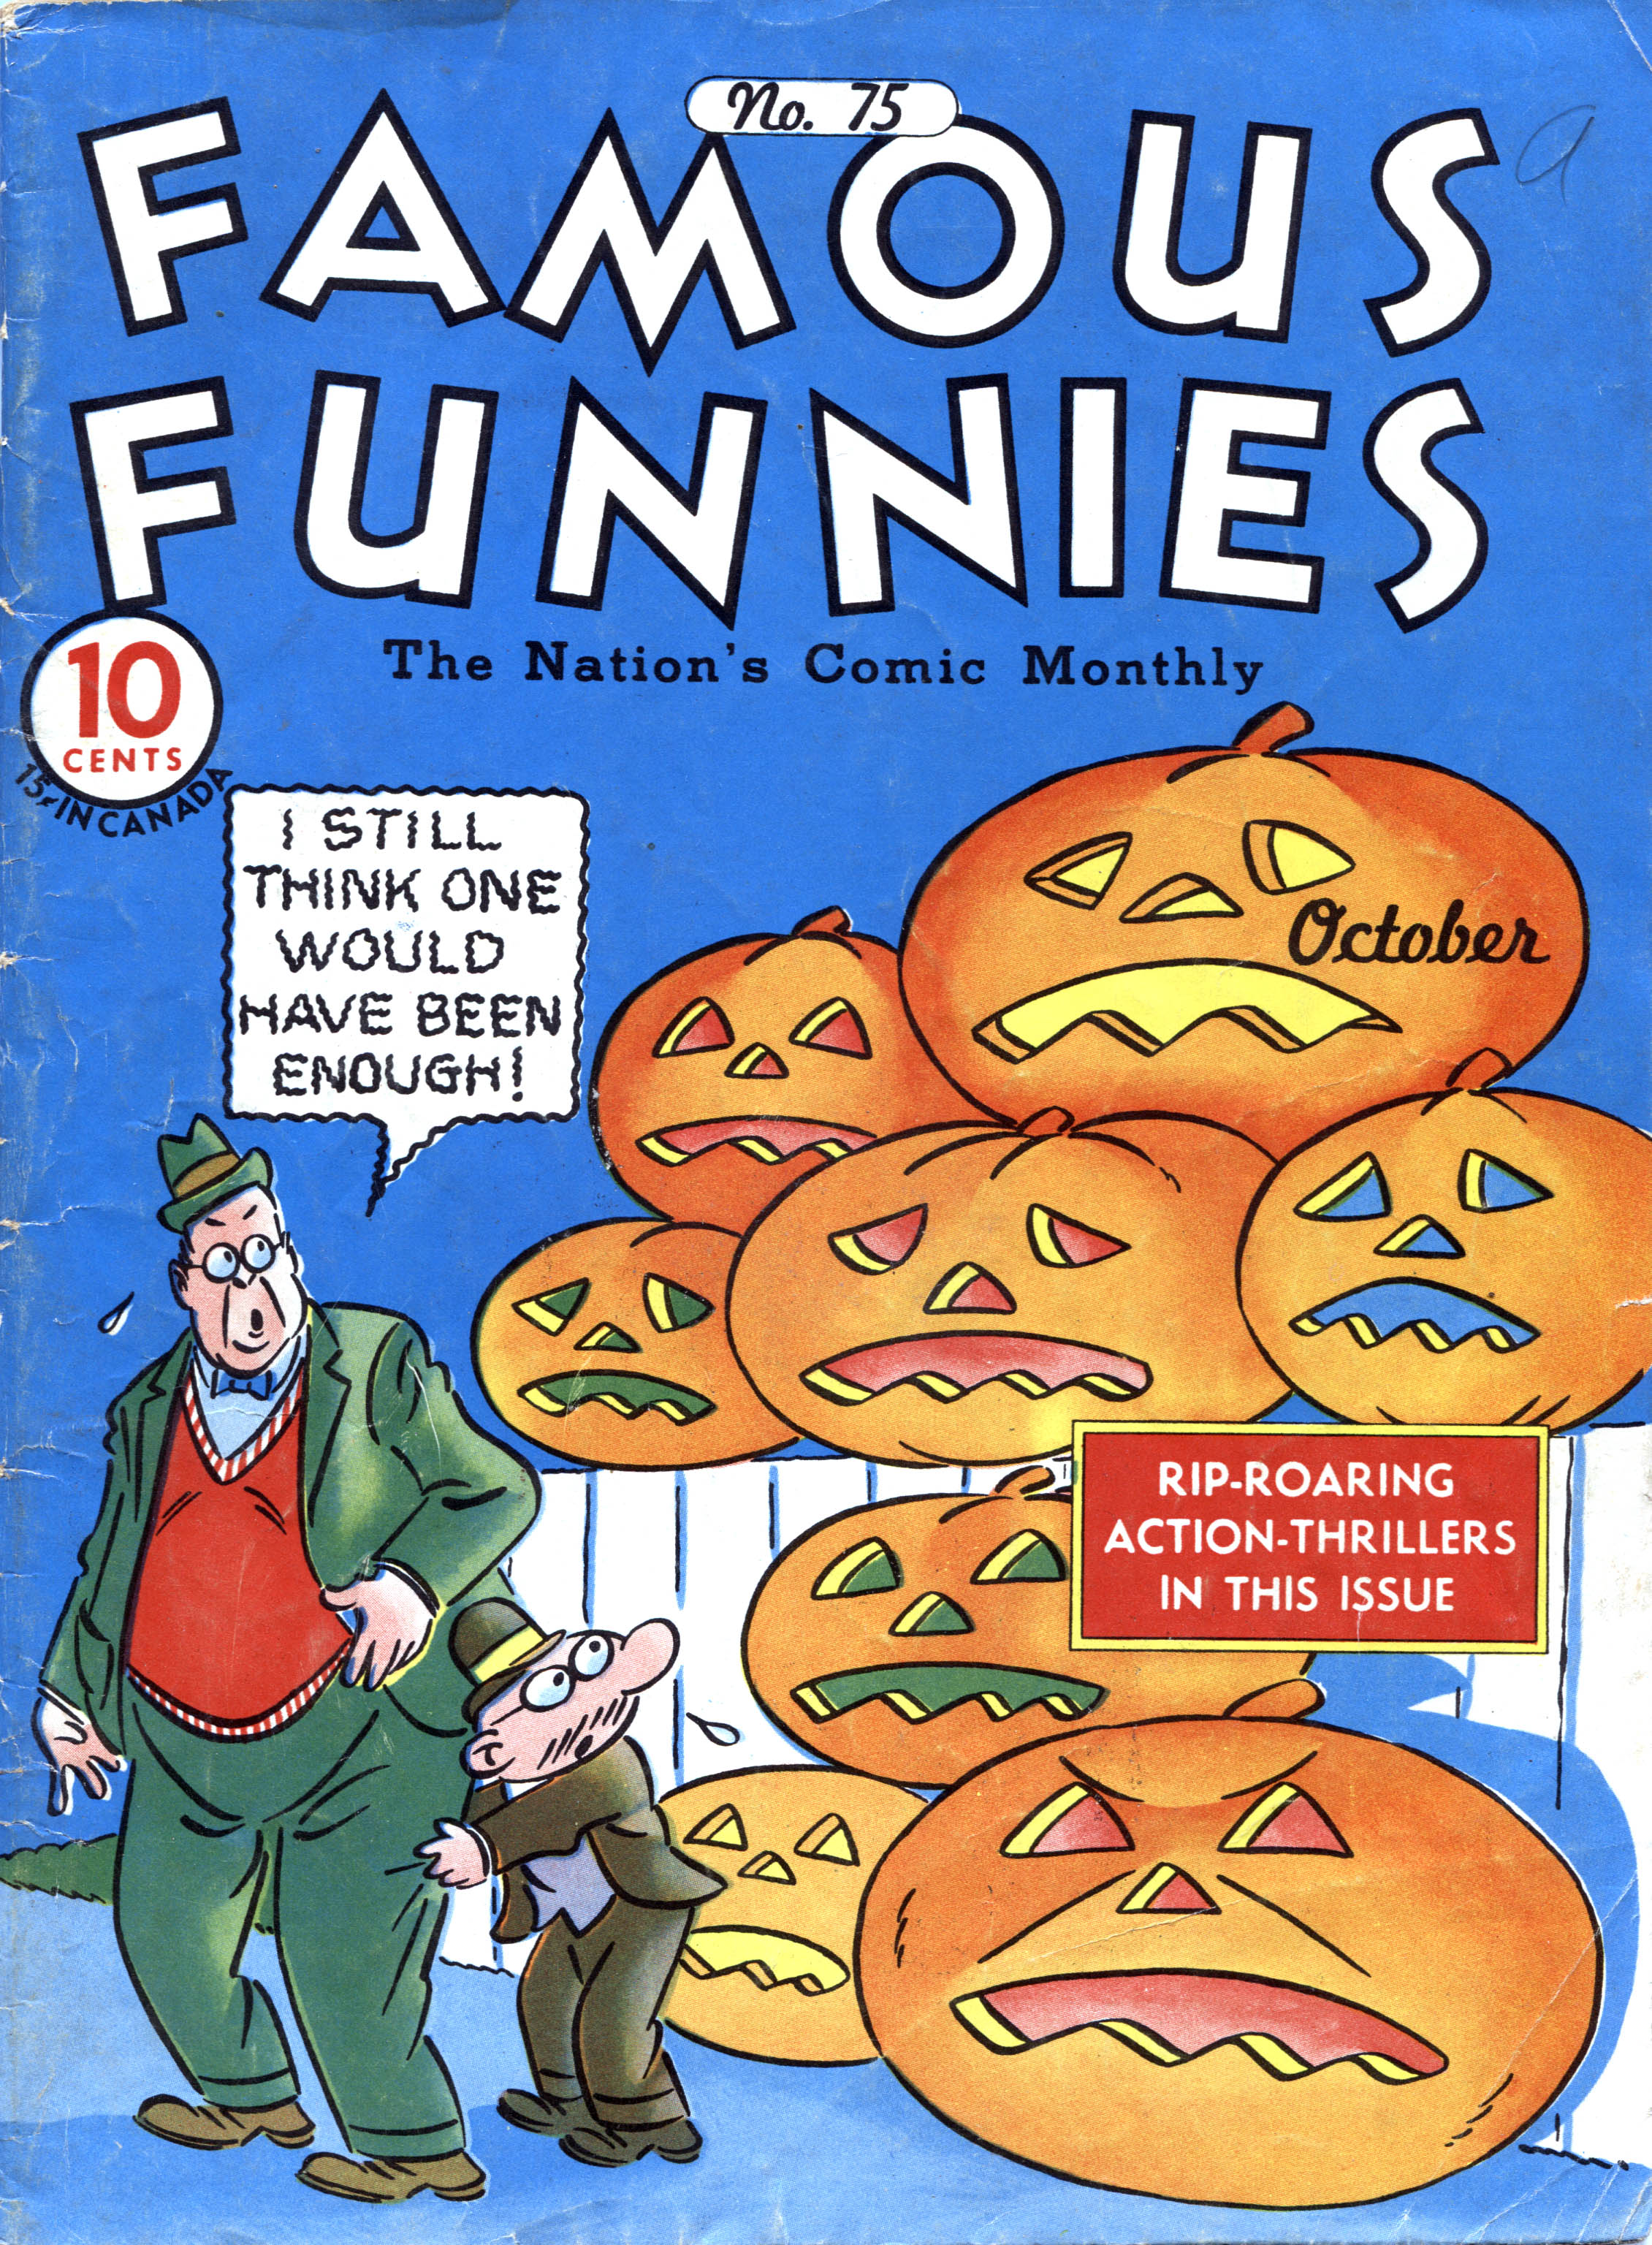 Read online Famous Funnies comic -  Issue #75 - 1